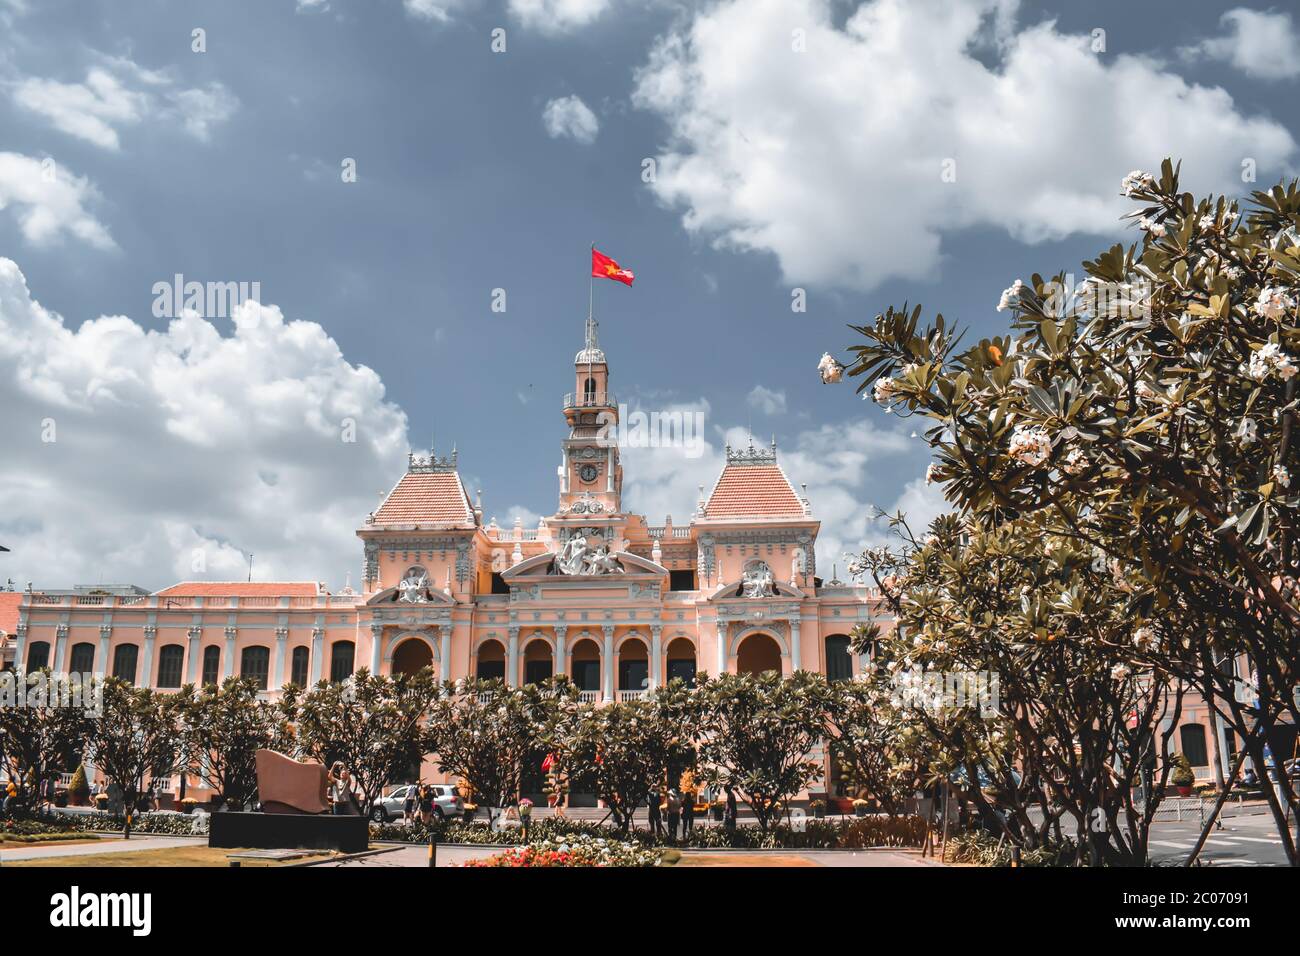 The colonial French style Saigon Town Hall in the Ho Chi Minh City in Vietnam Stock Photo